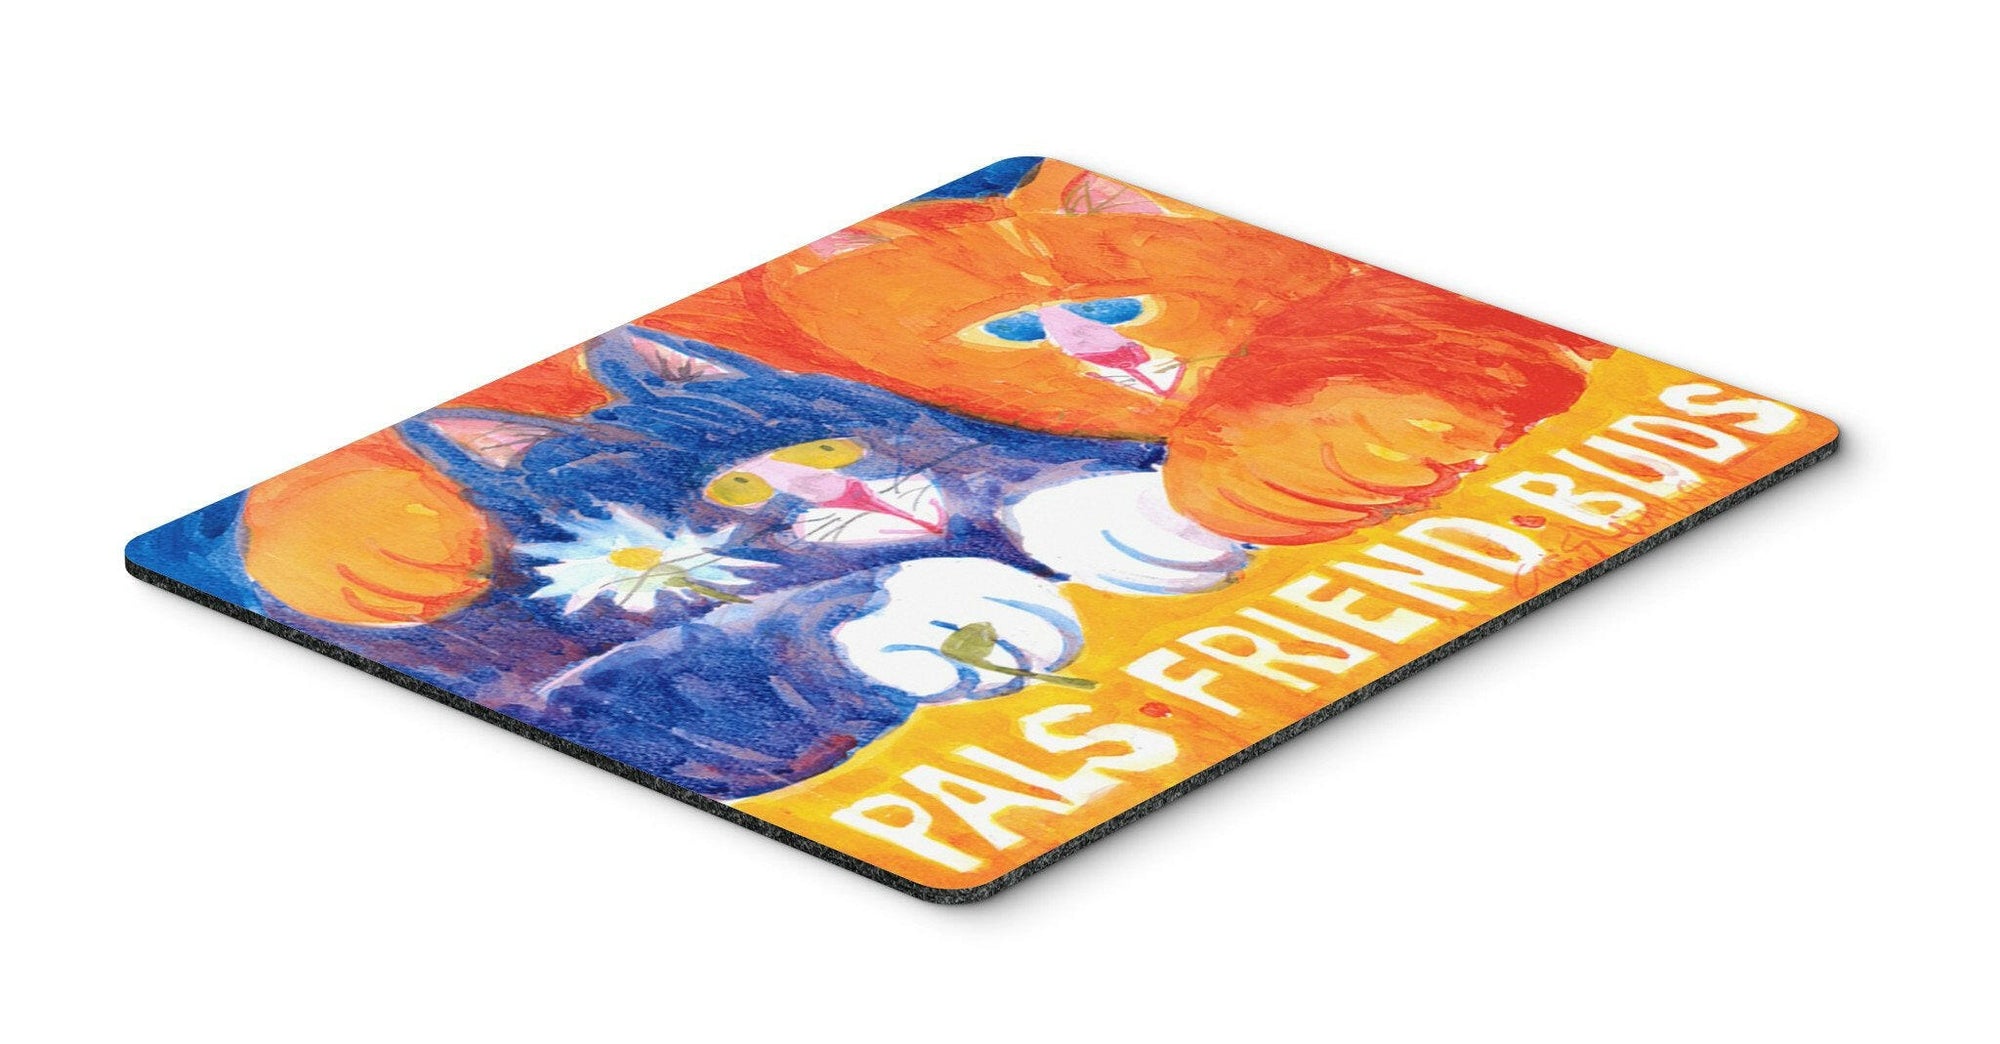 Cats Pals Friends Buds  Mouse pad, hot pad, or trivet by Caroline's Treasures